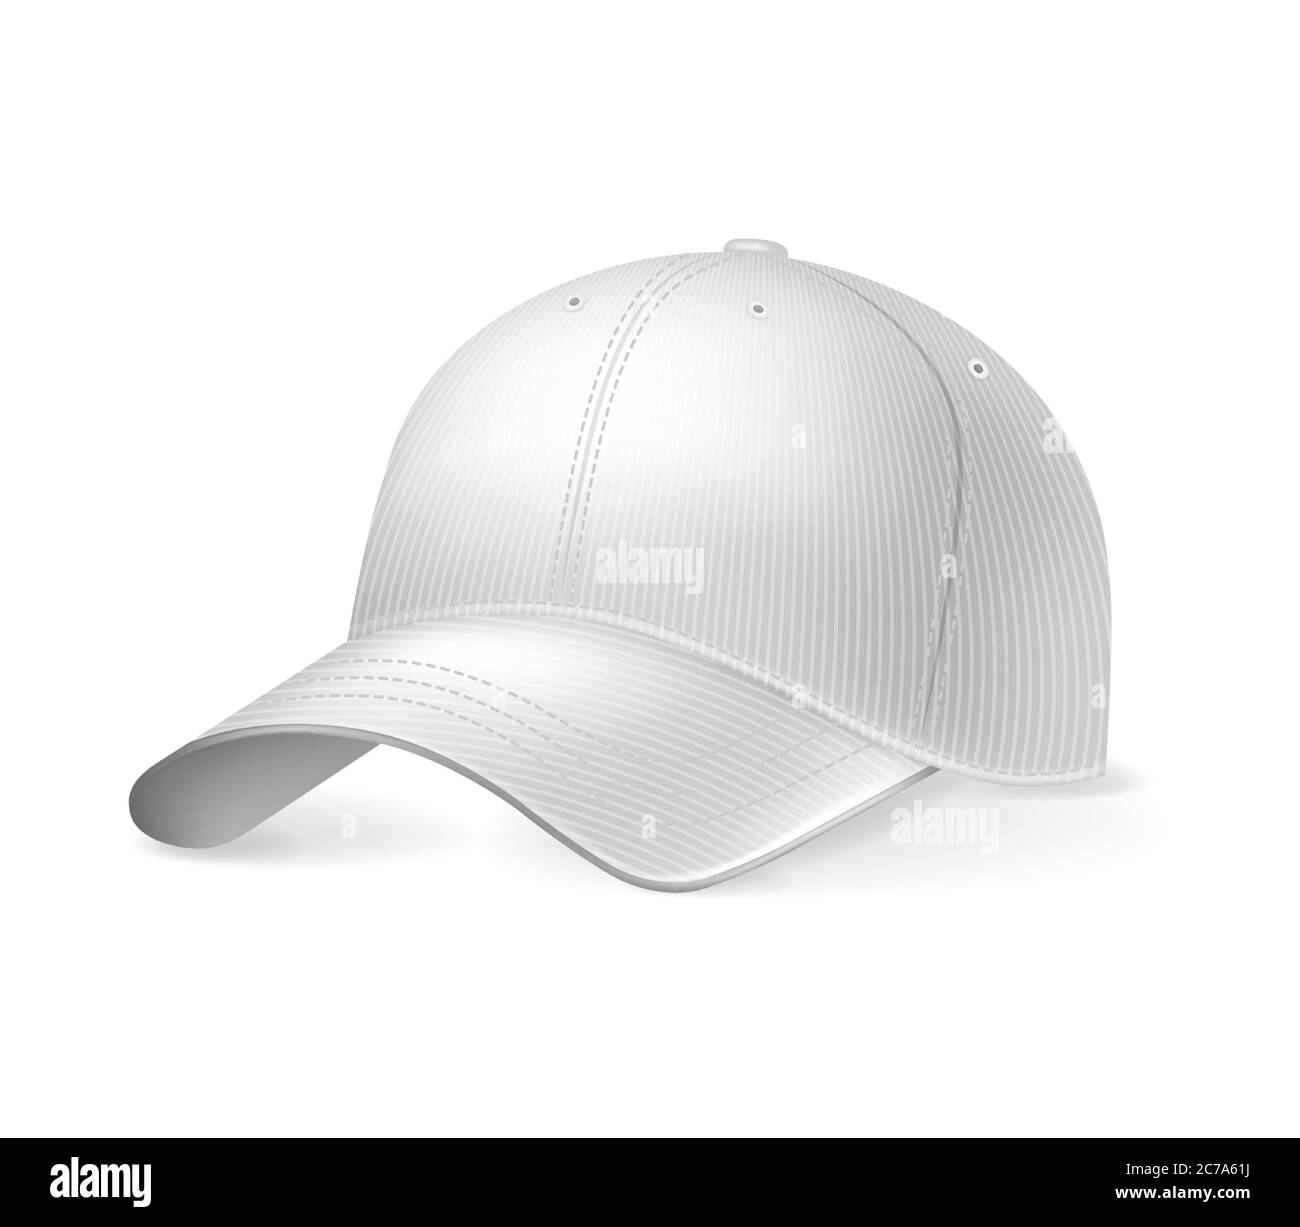 Baseball cap on white background, isolated. Sports headwear mockup for design, realistic vector illustration collection. Stock Vector